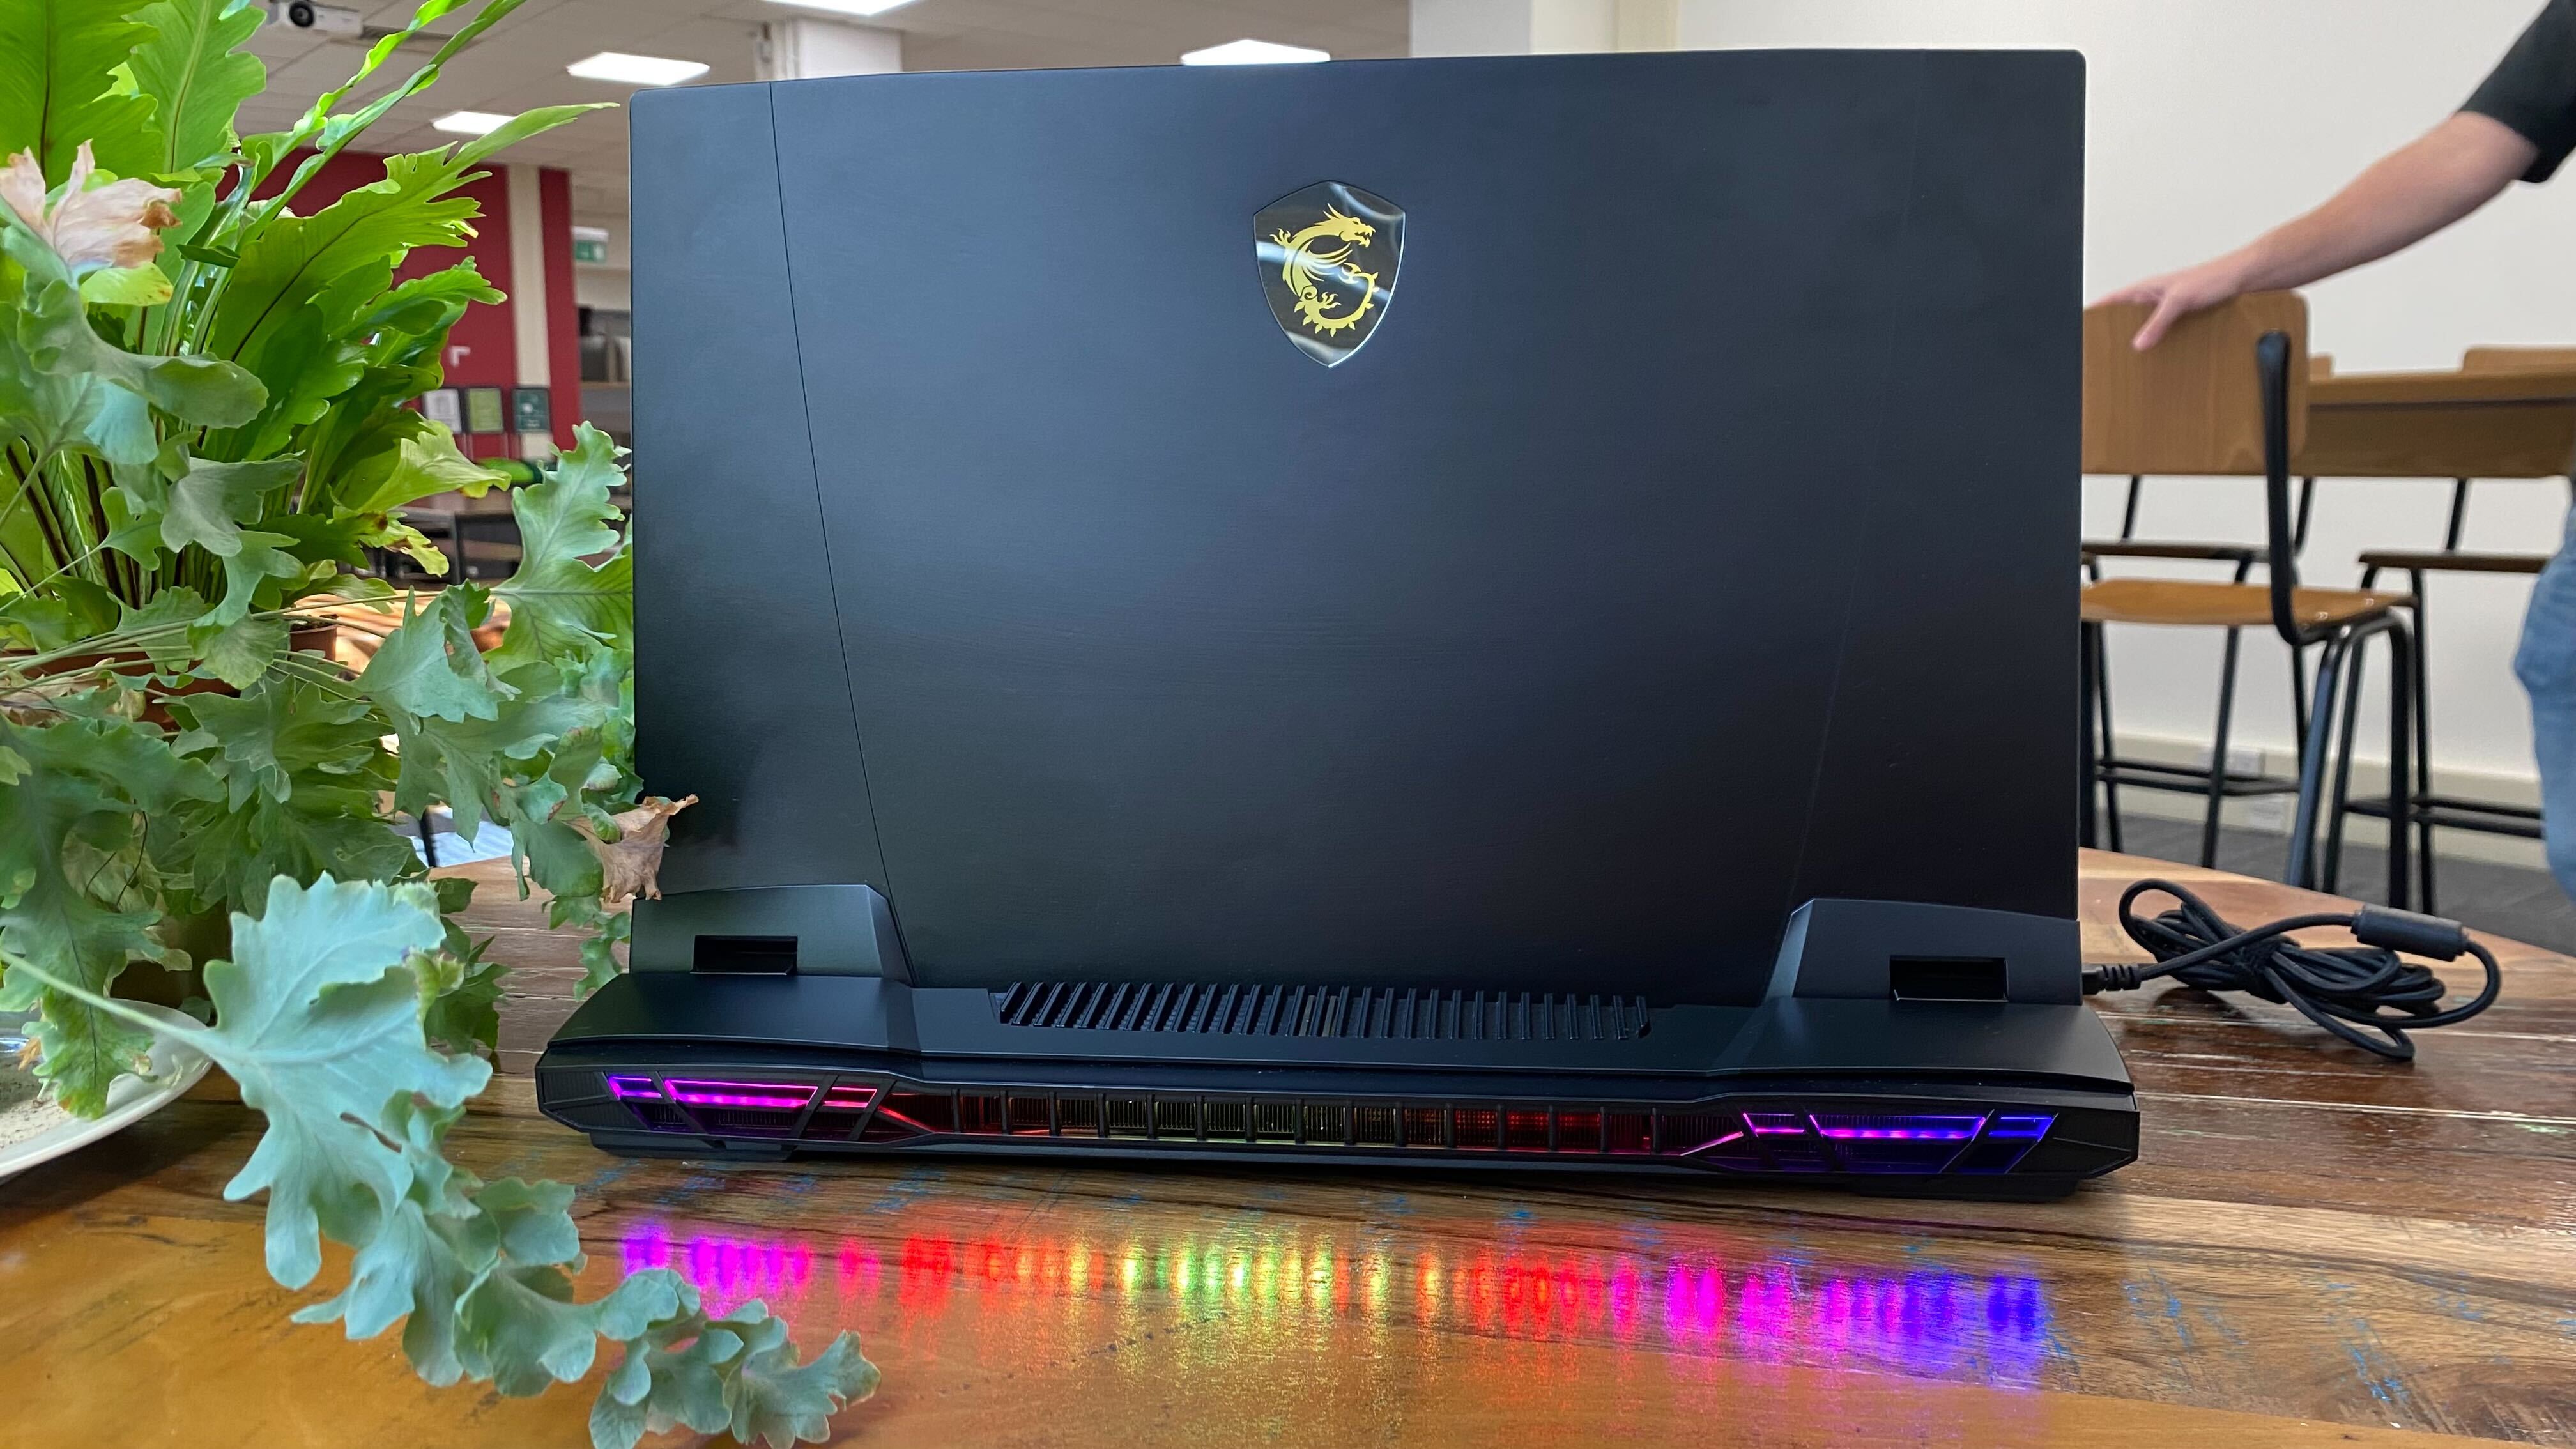 Photos of MSI GT77 on a wooden table at various angles